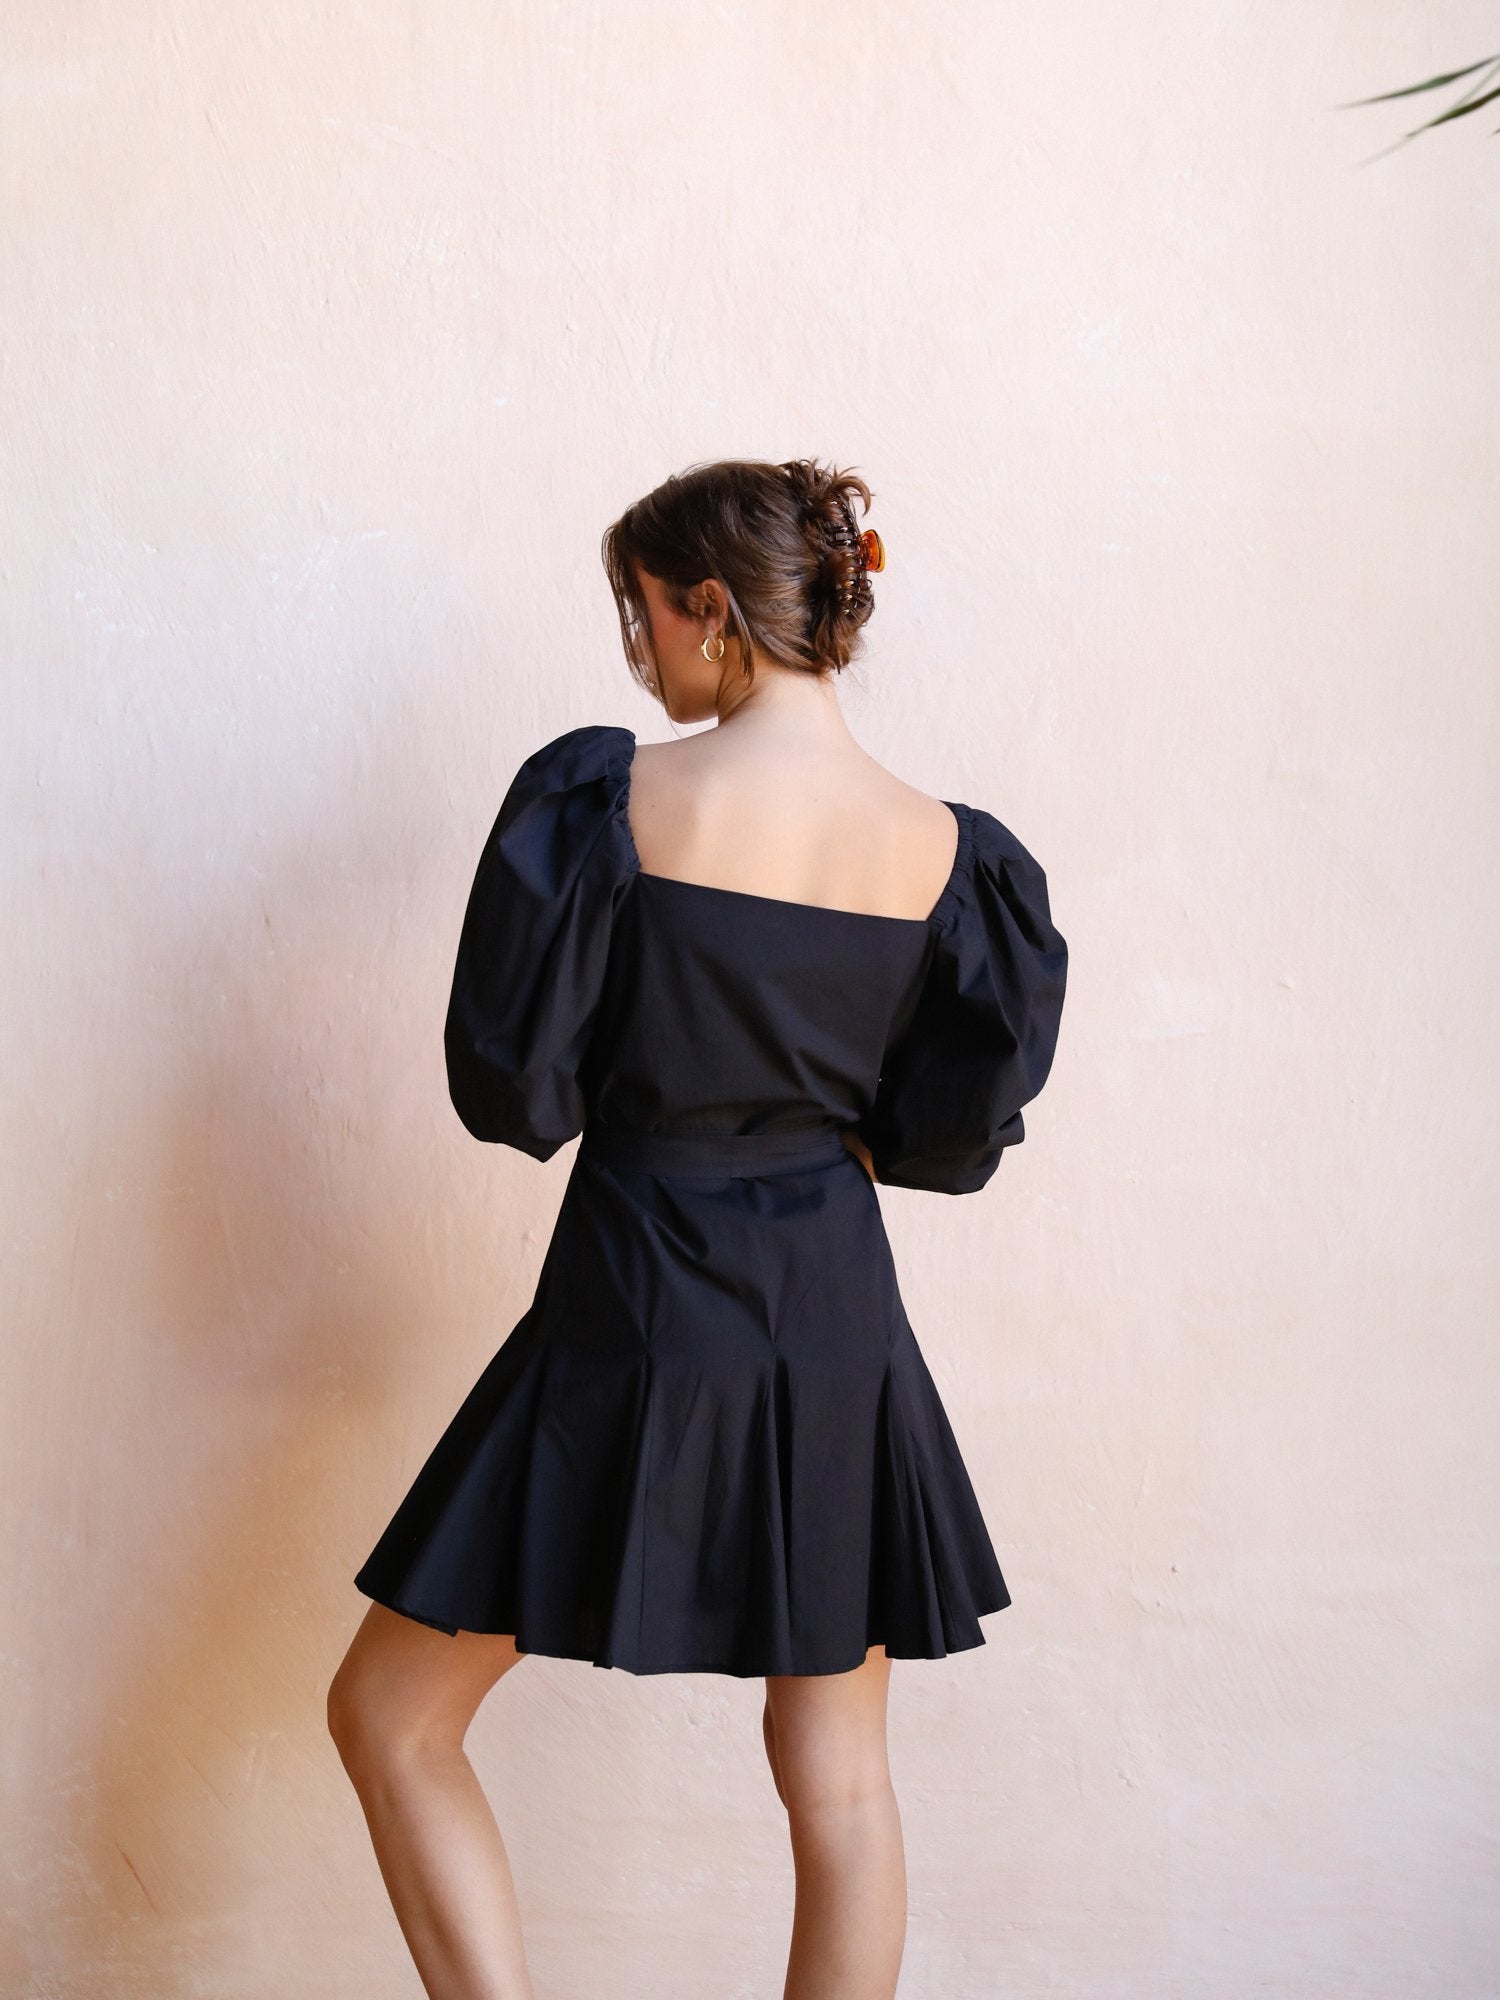 MILLE Clothing Anais Dress in Black